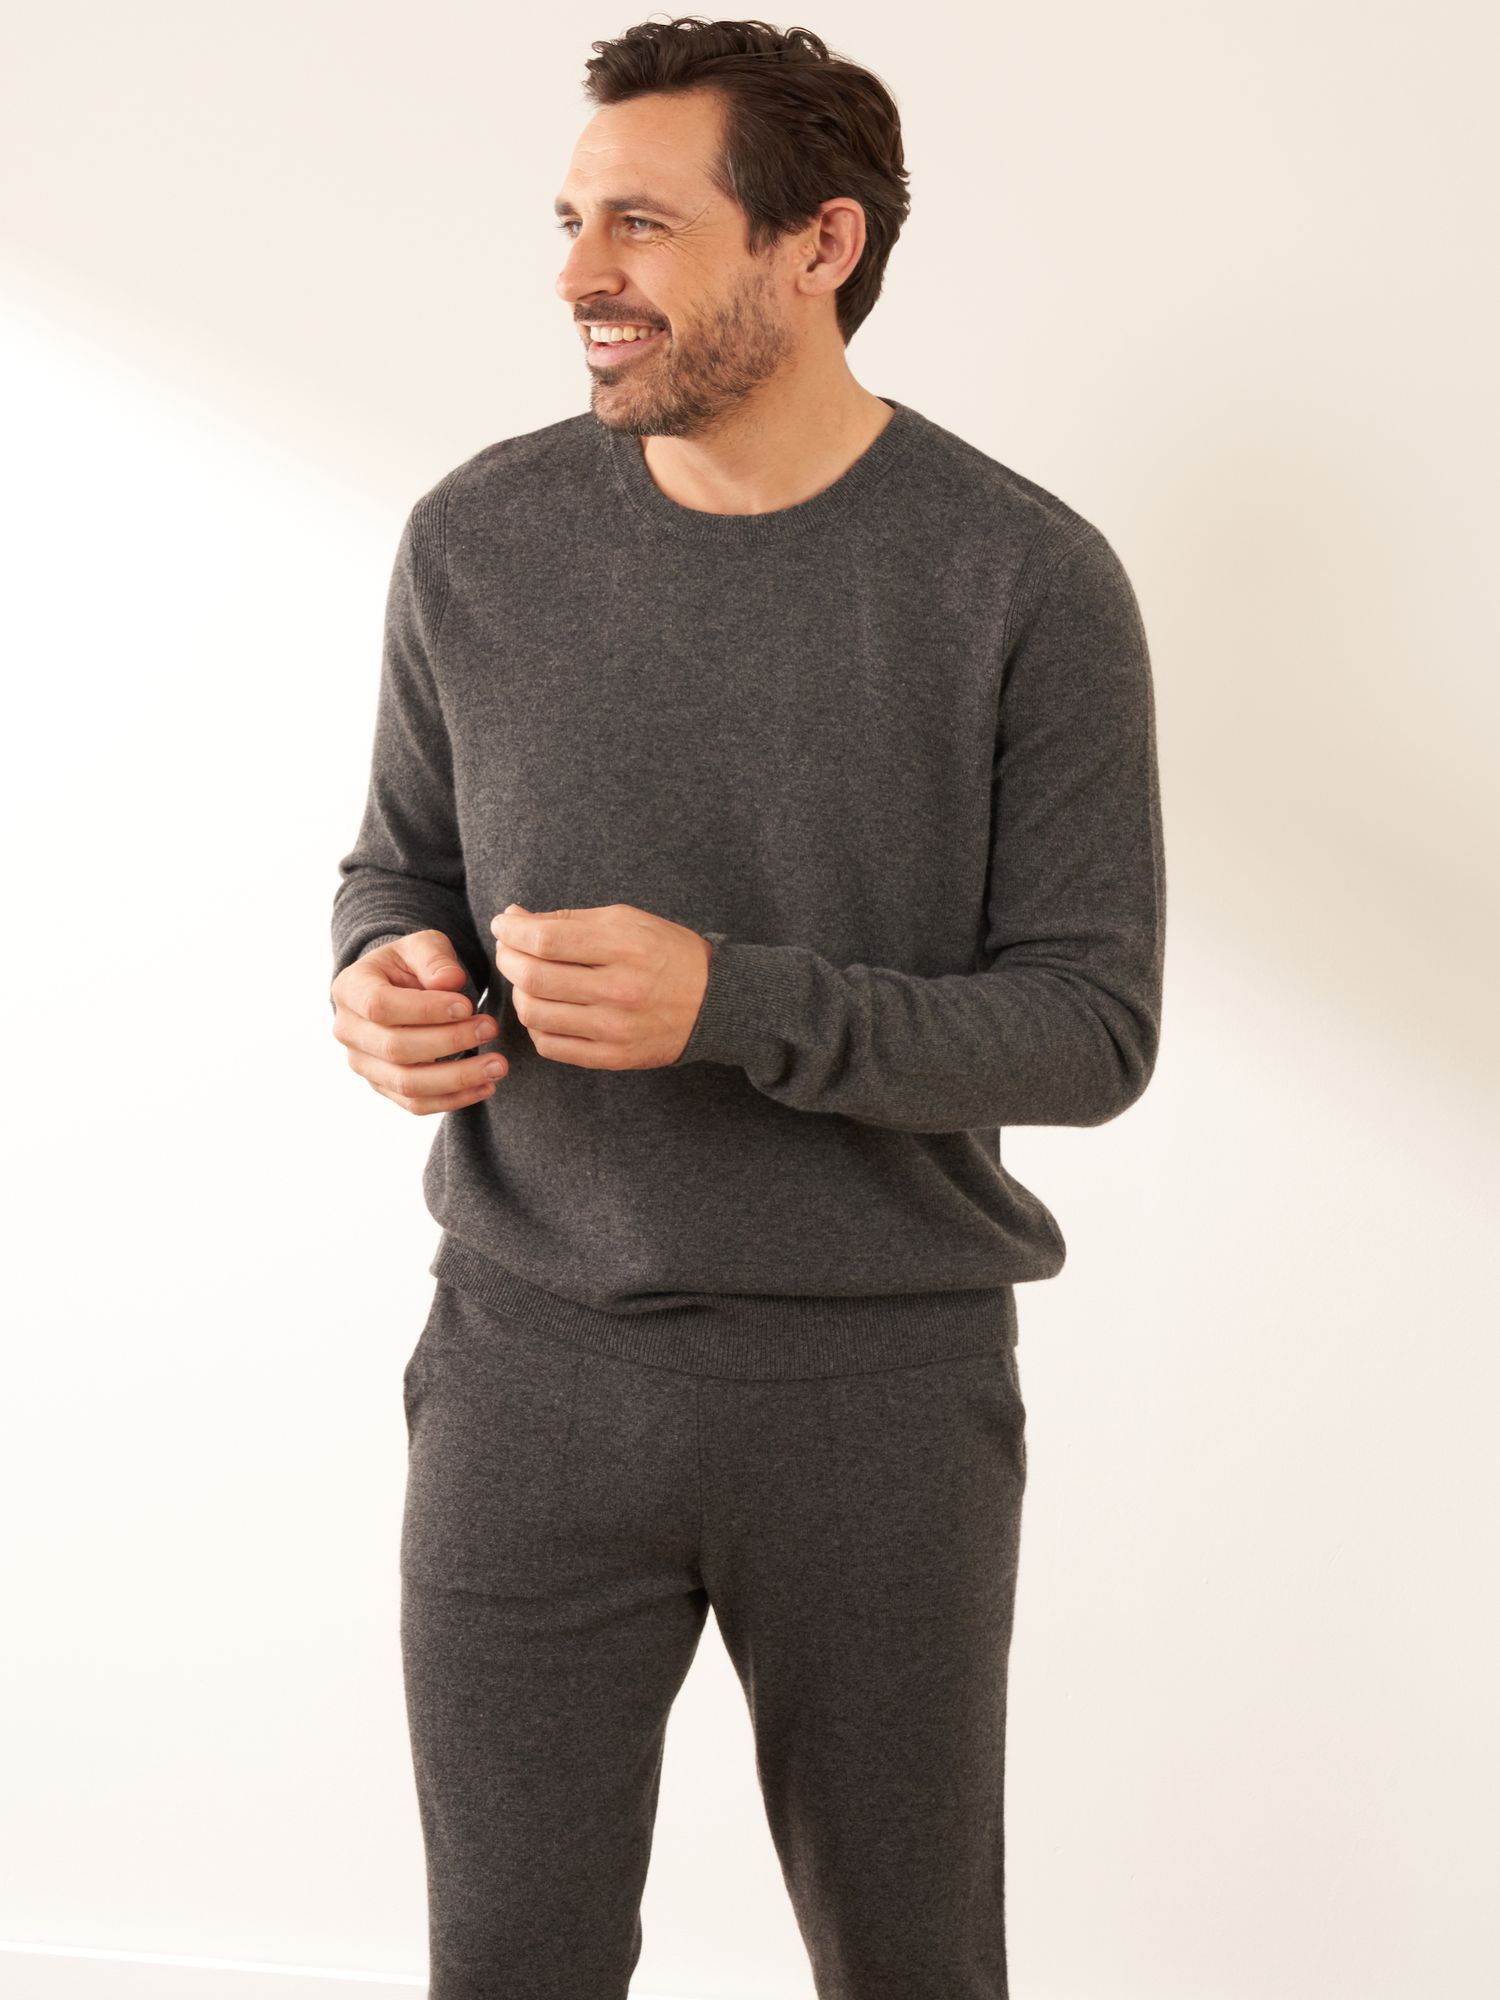 Truly Cashmere Crew Neck Jumper, Charcoal Marl, S